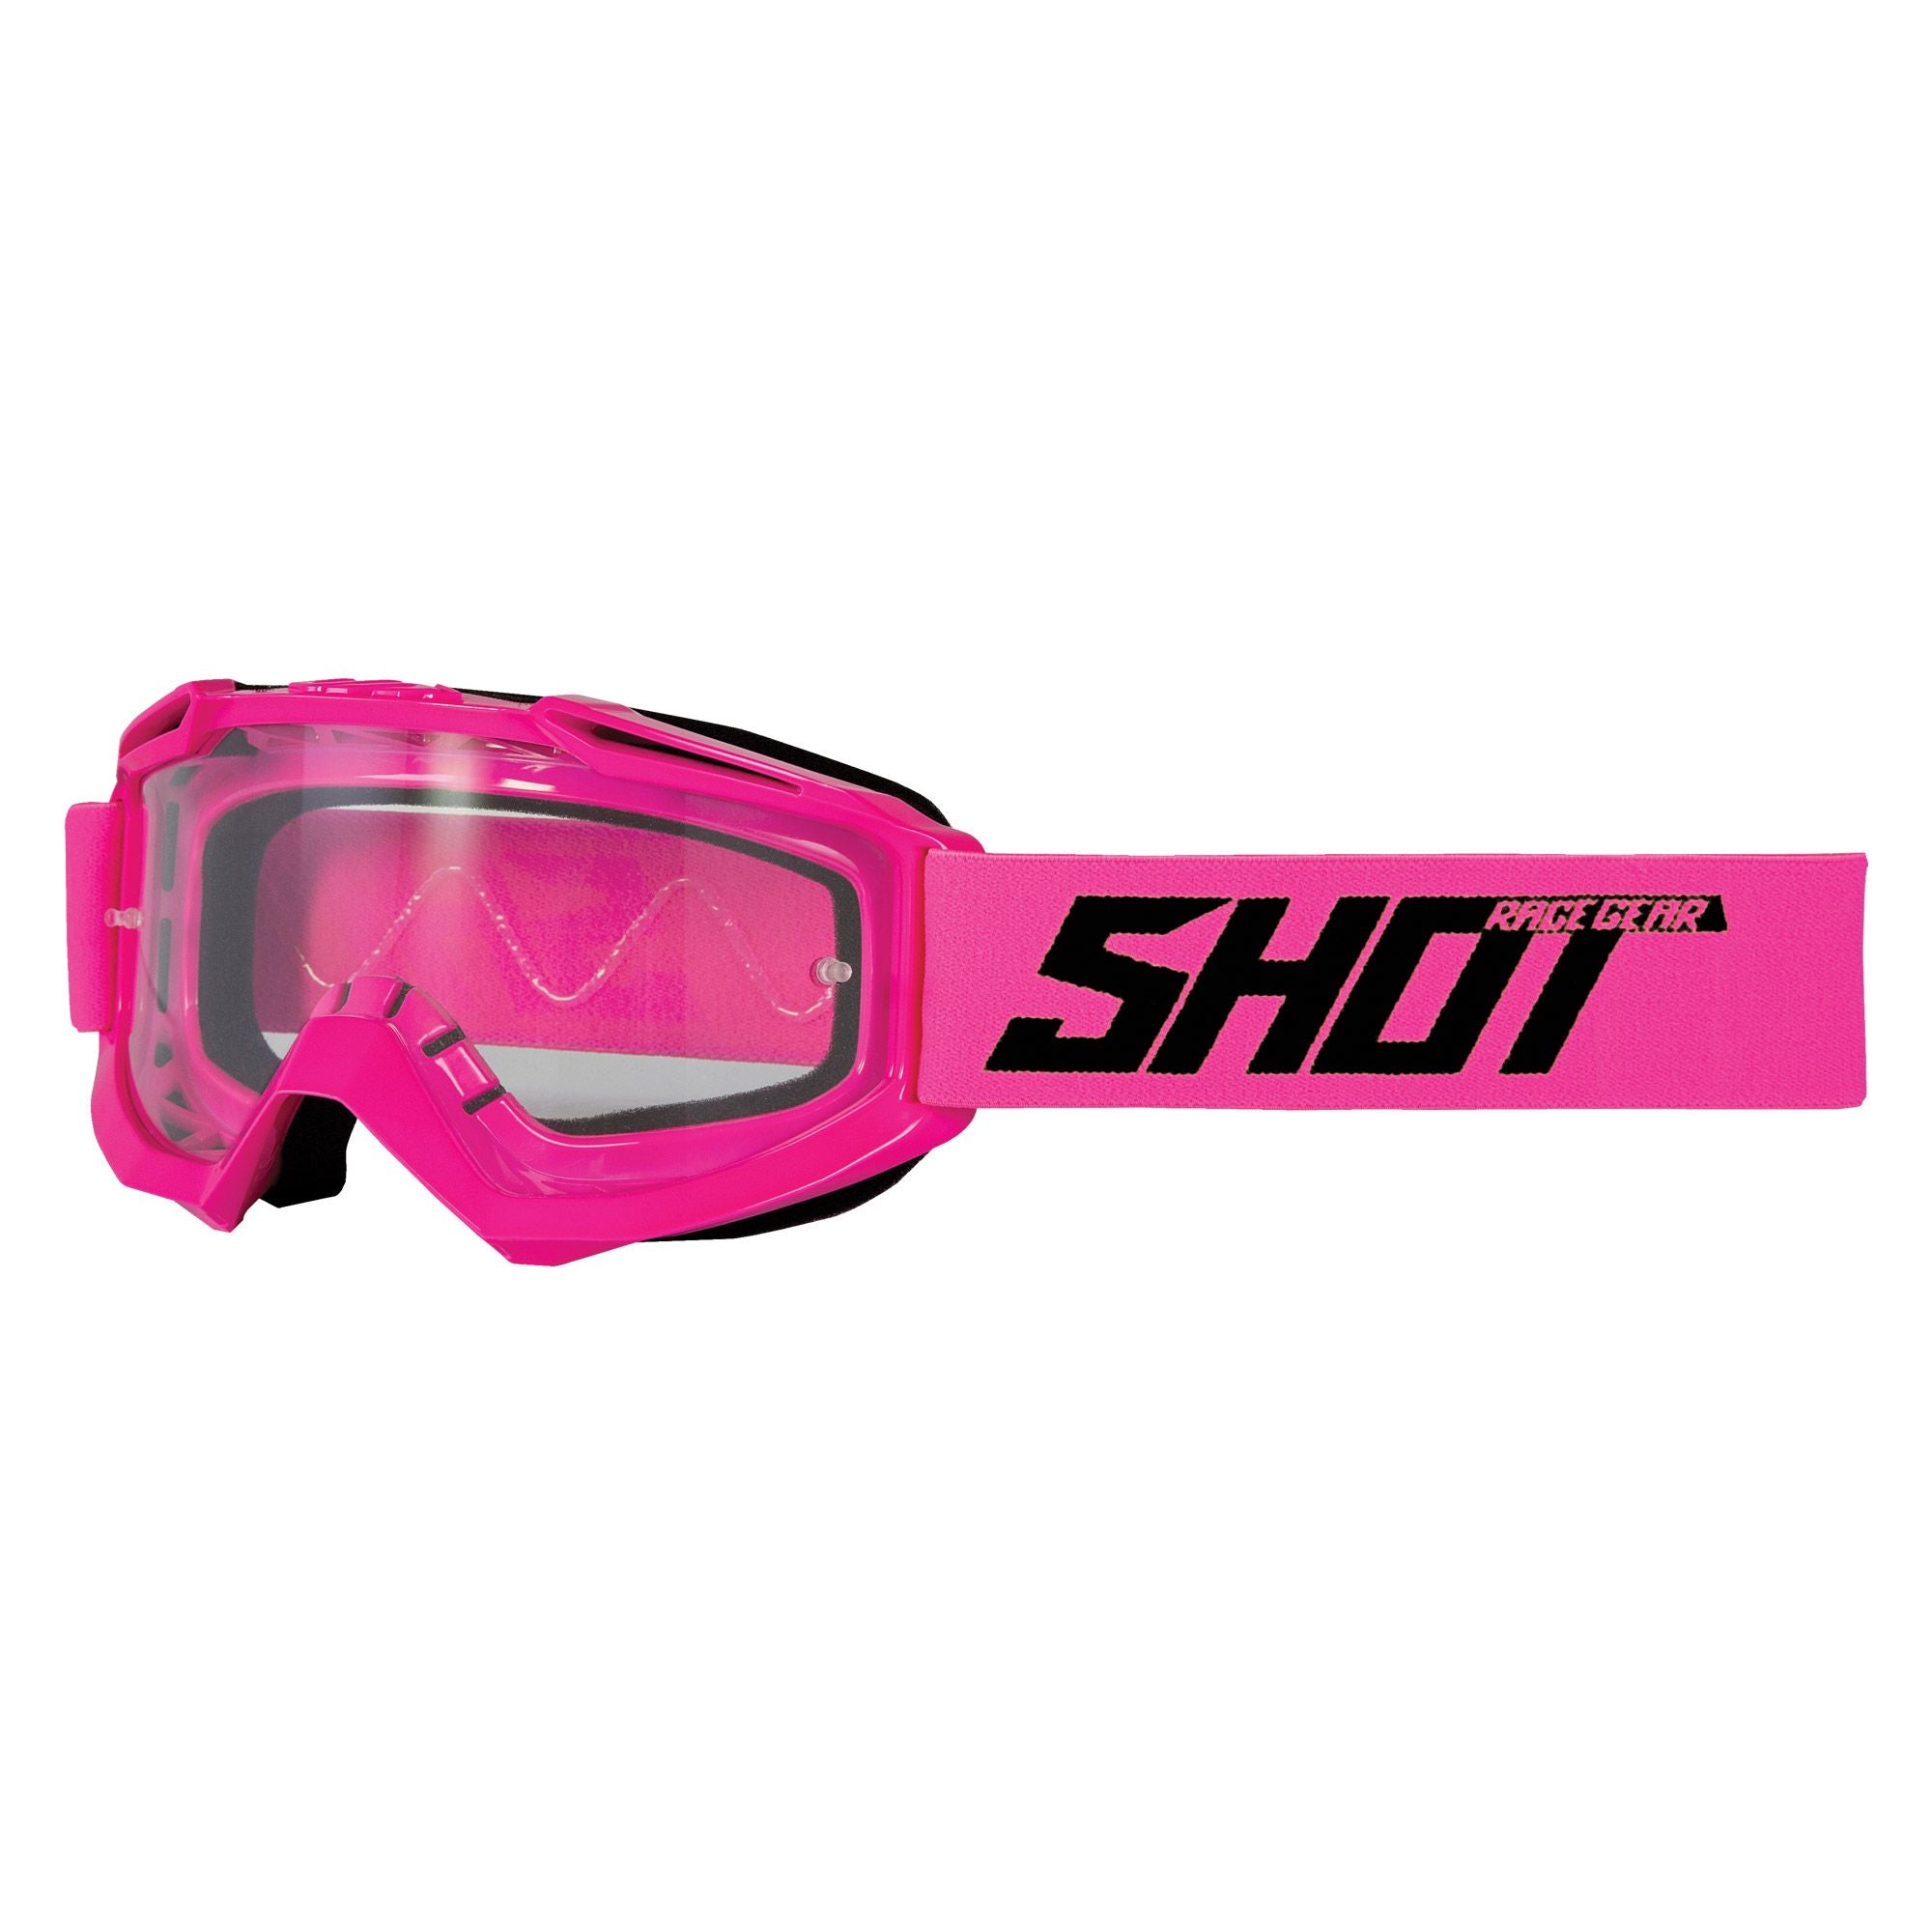 Load image into Gallery viewer, Shot Assault Neon Adult Motocross Goggles
